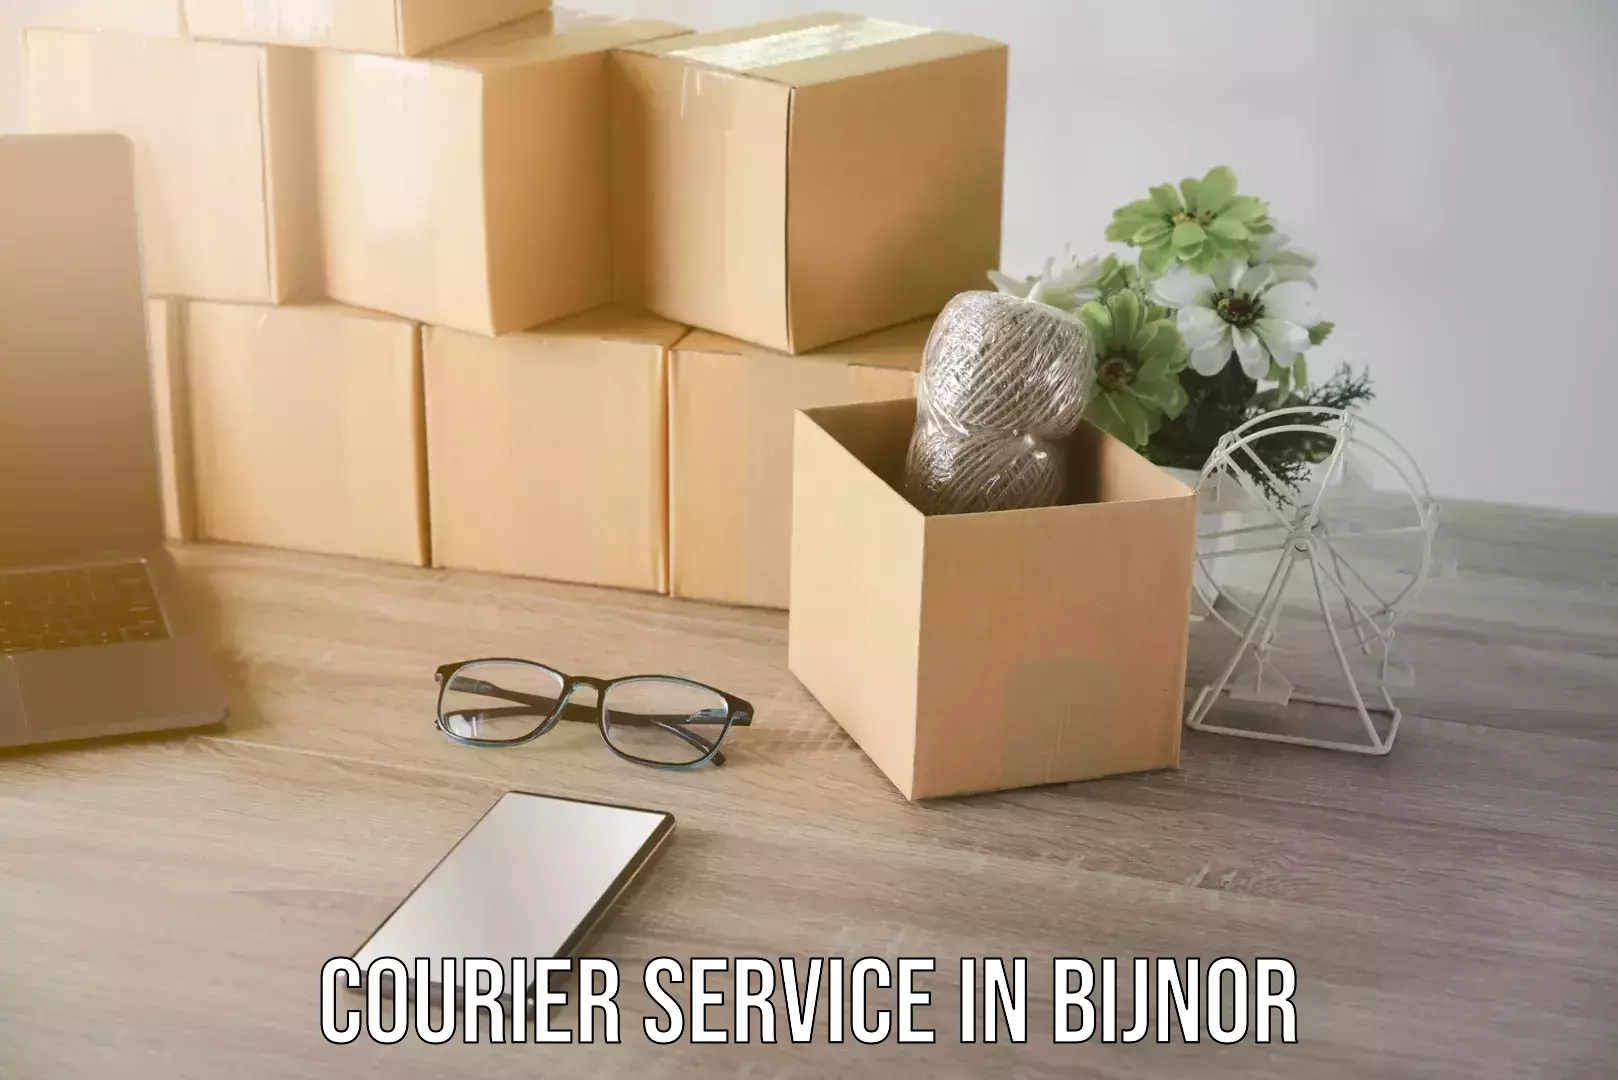 Secure package delivery in Bijnor